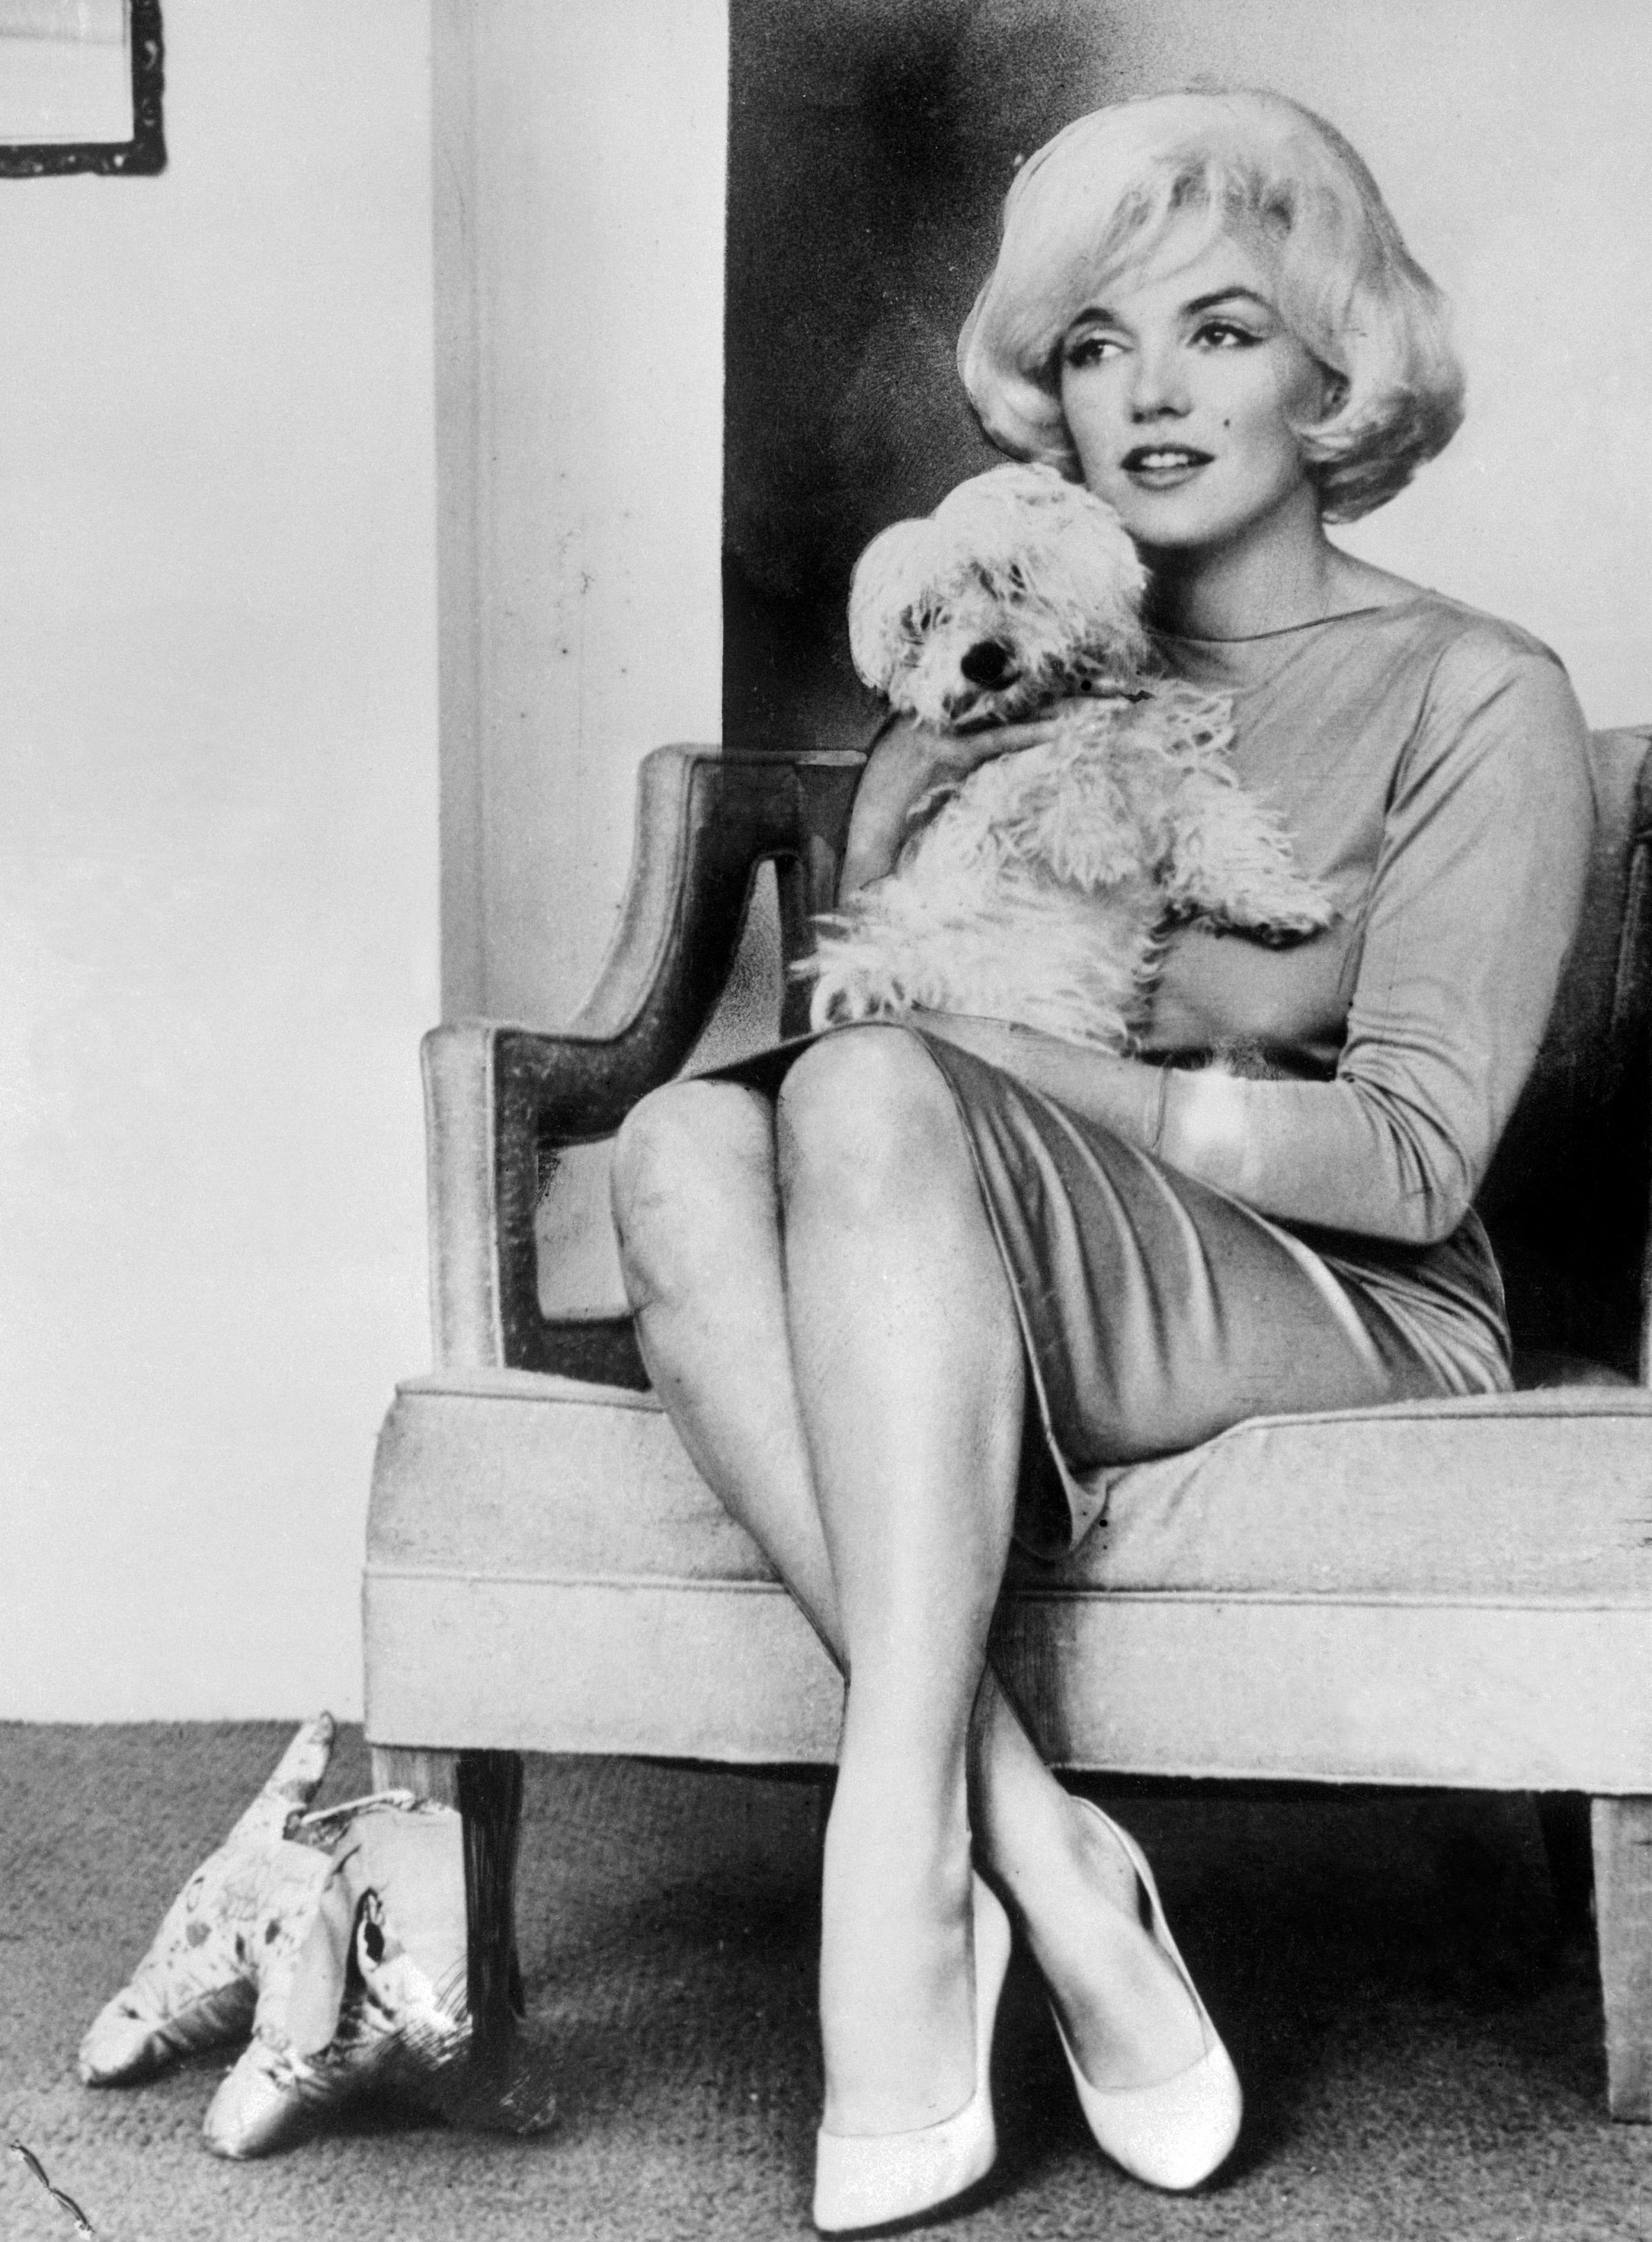 Marilyn Monroe is shown with her small white dog, Maf.